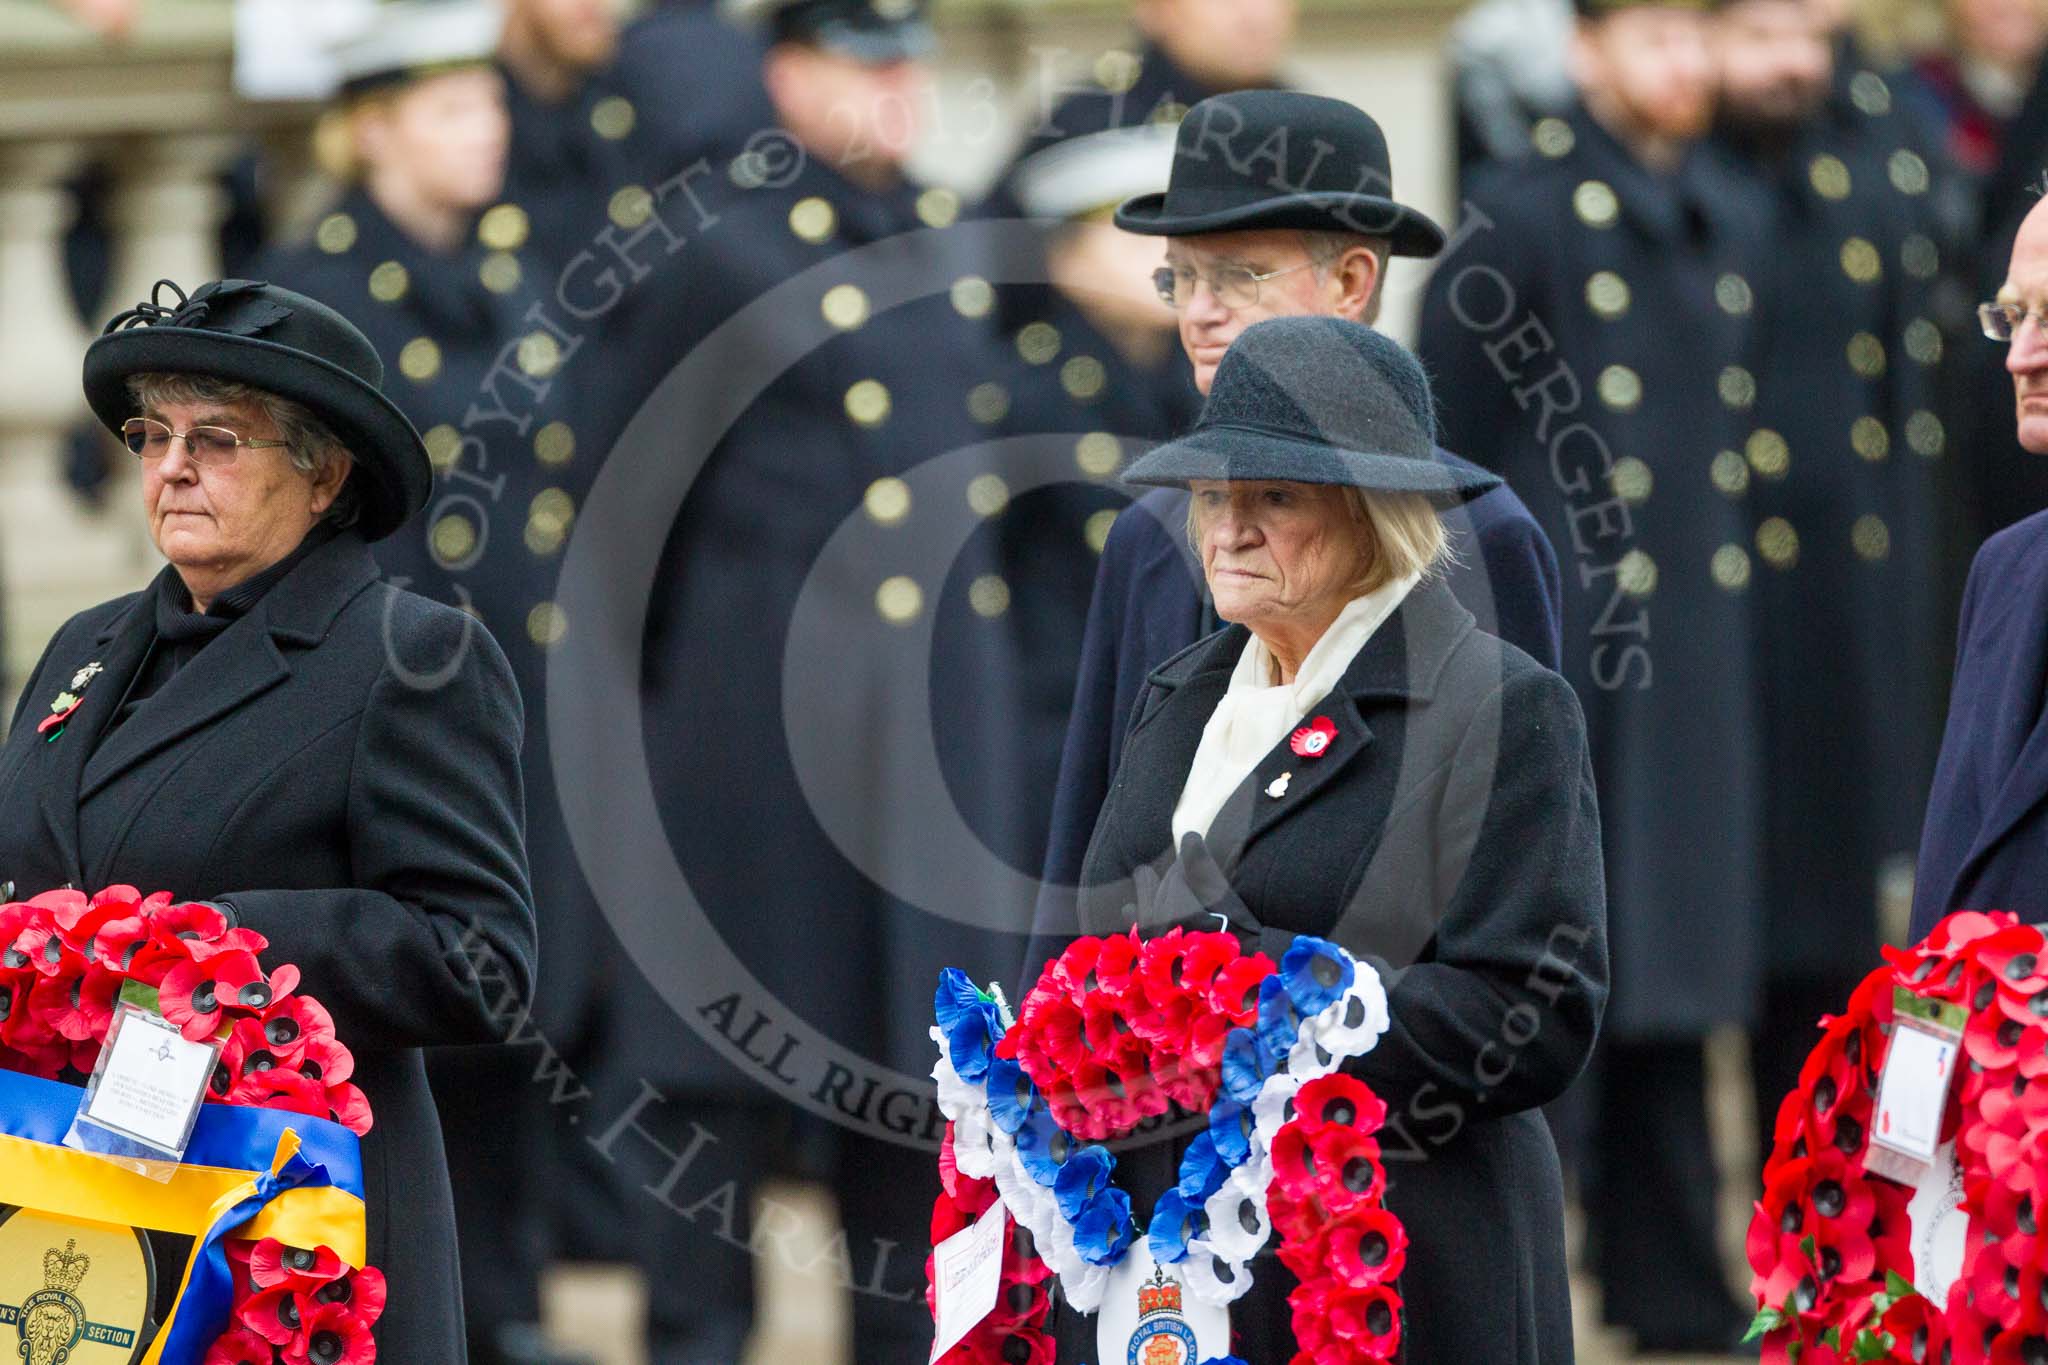 Remembrance Sunday at the Cenotaph 2015: The Royal British Legion Women’s Section National Chairman Mrs Marilyn Humphry, followed by Janet Harvey, representing the British Legion Scotland. Image #333, 08 November 2015 11:24 Whitehall, London, UK